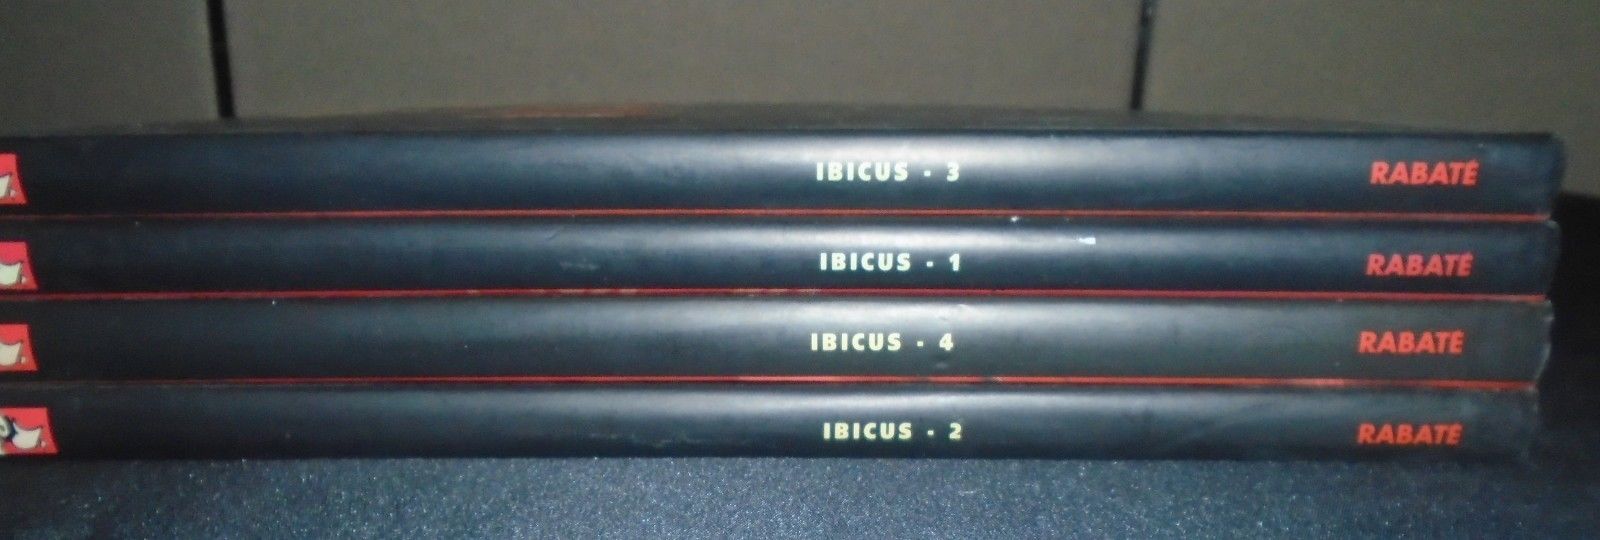 Rabate Ibicus All 4 Series In Great Condition(LOC8)